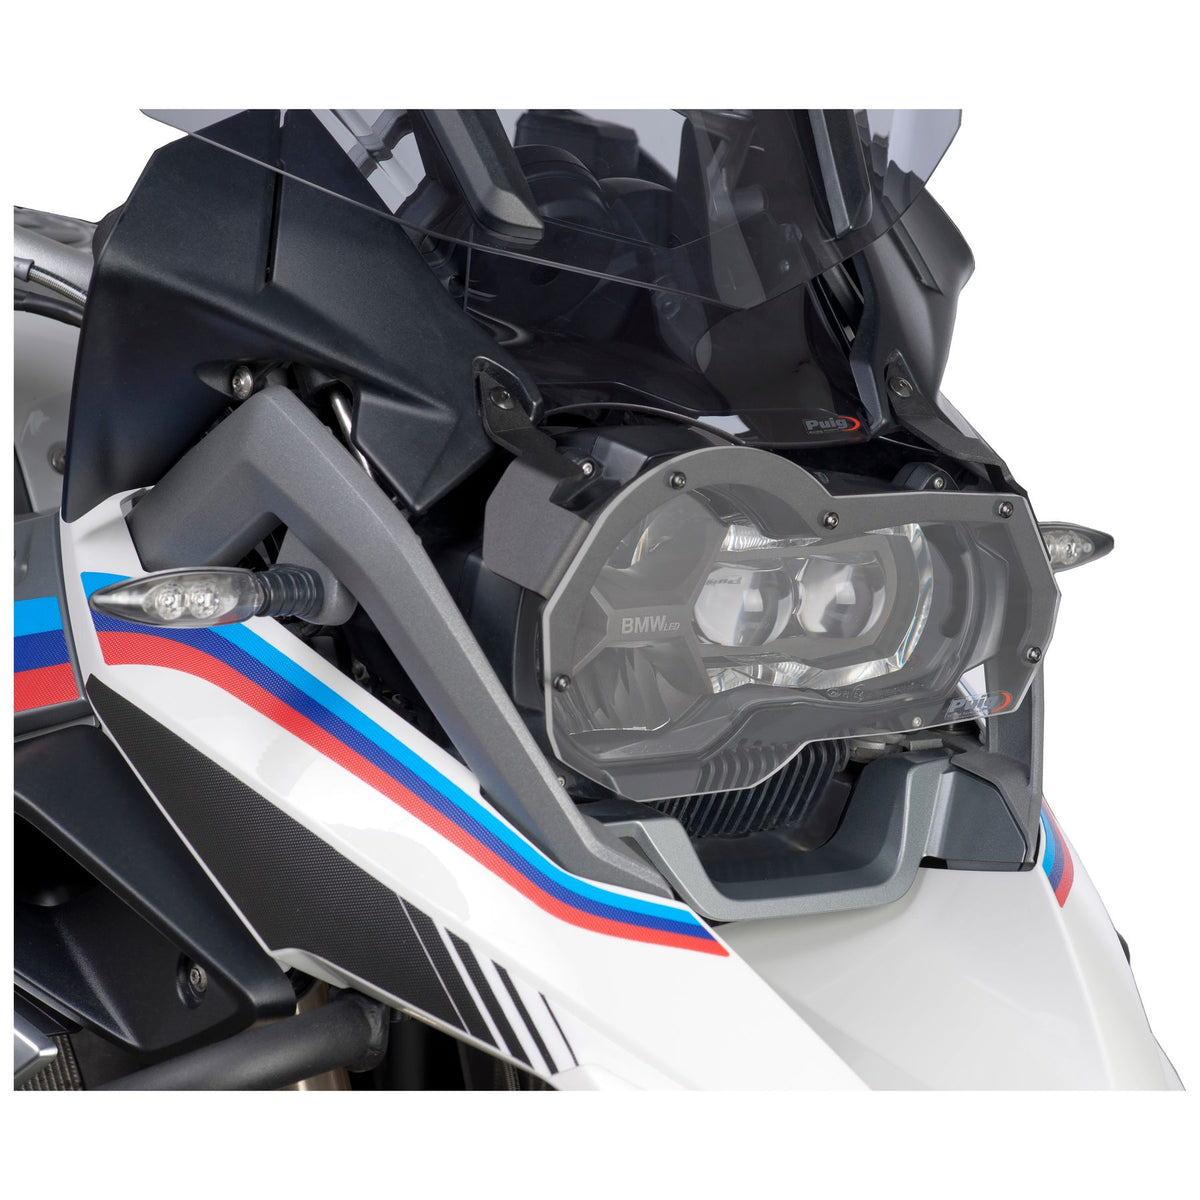 Buy Puig Headlight Protector for BMW R 1250 GS Adventure Online